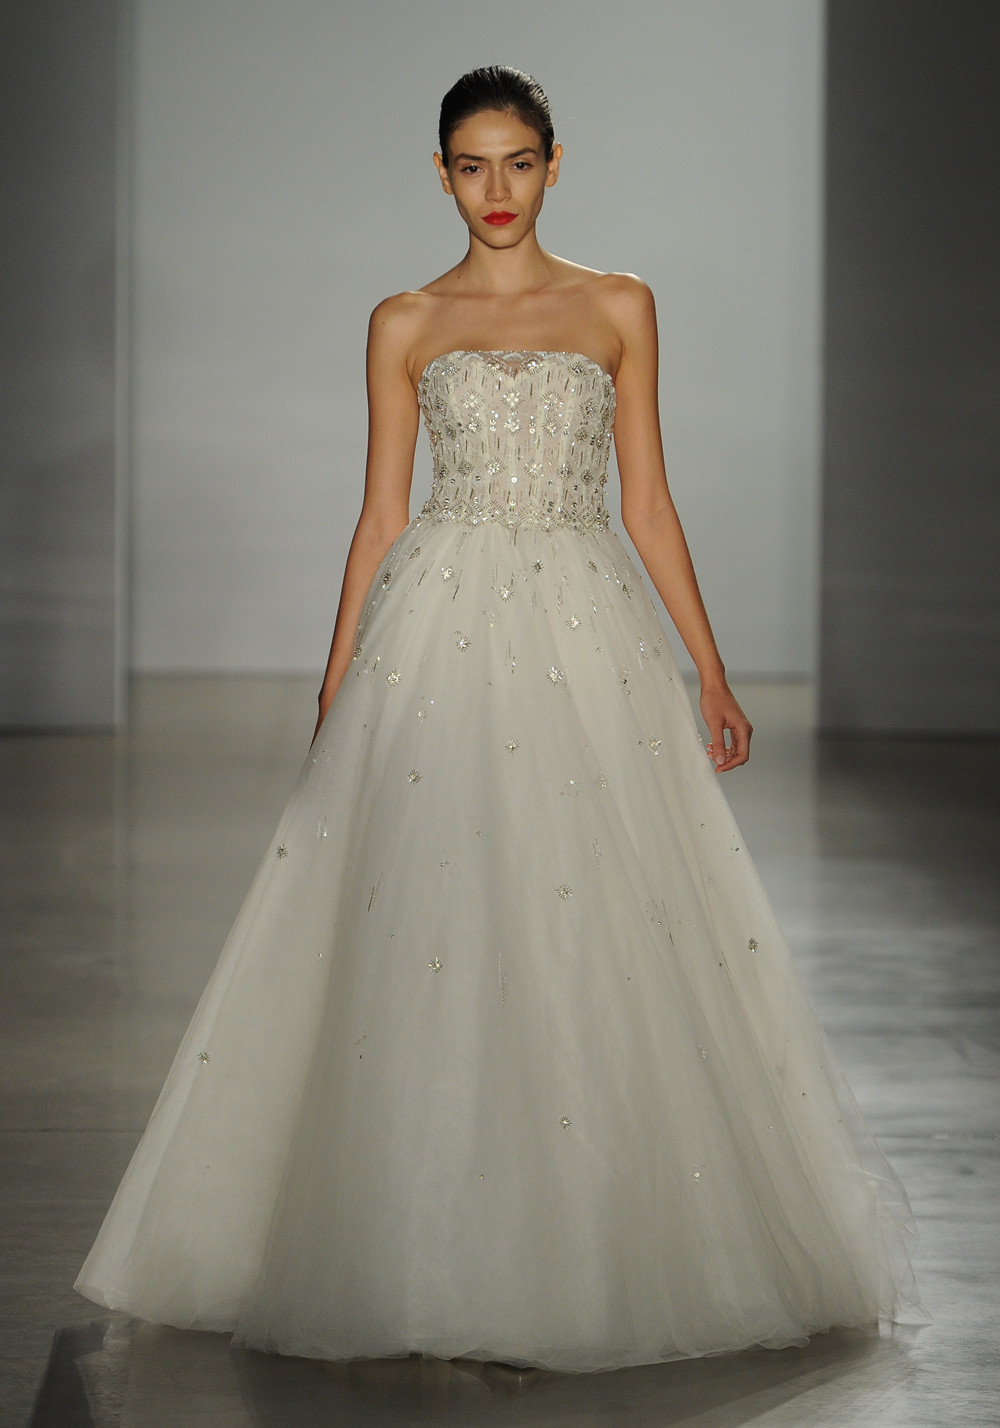 Images Of Wedding Gowns
 New Amsale Wedding Dresses For Fall 2016 Are Modern And